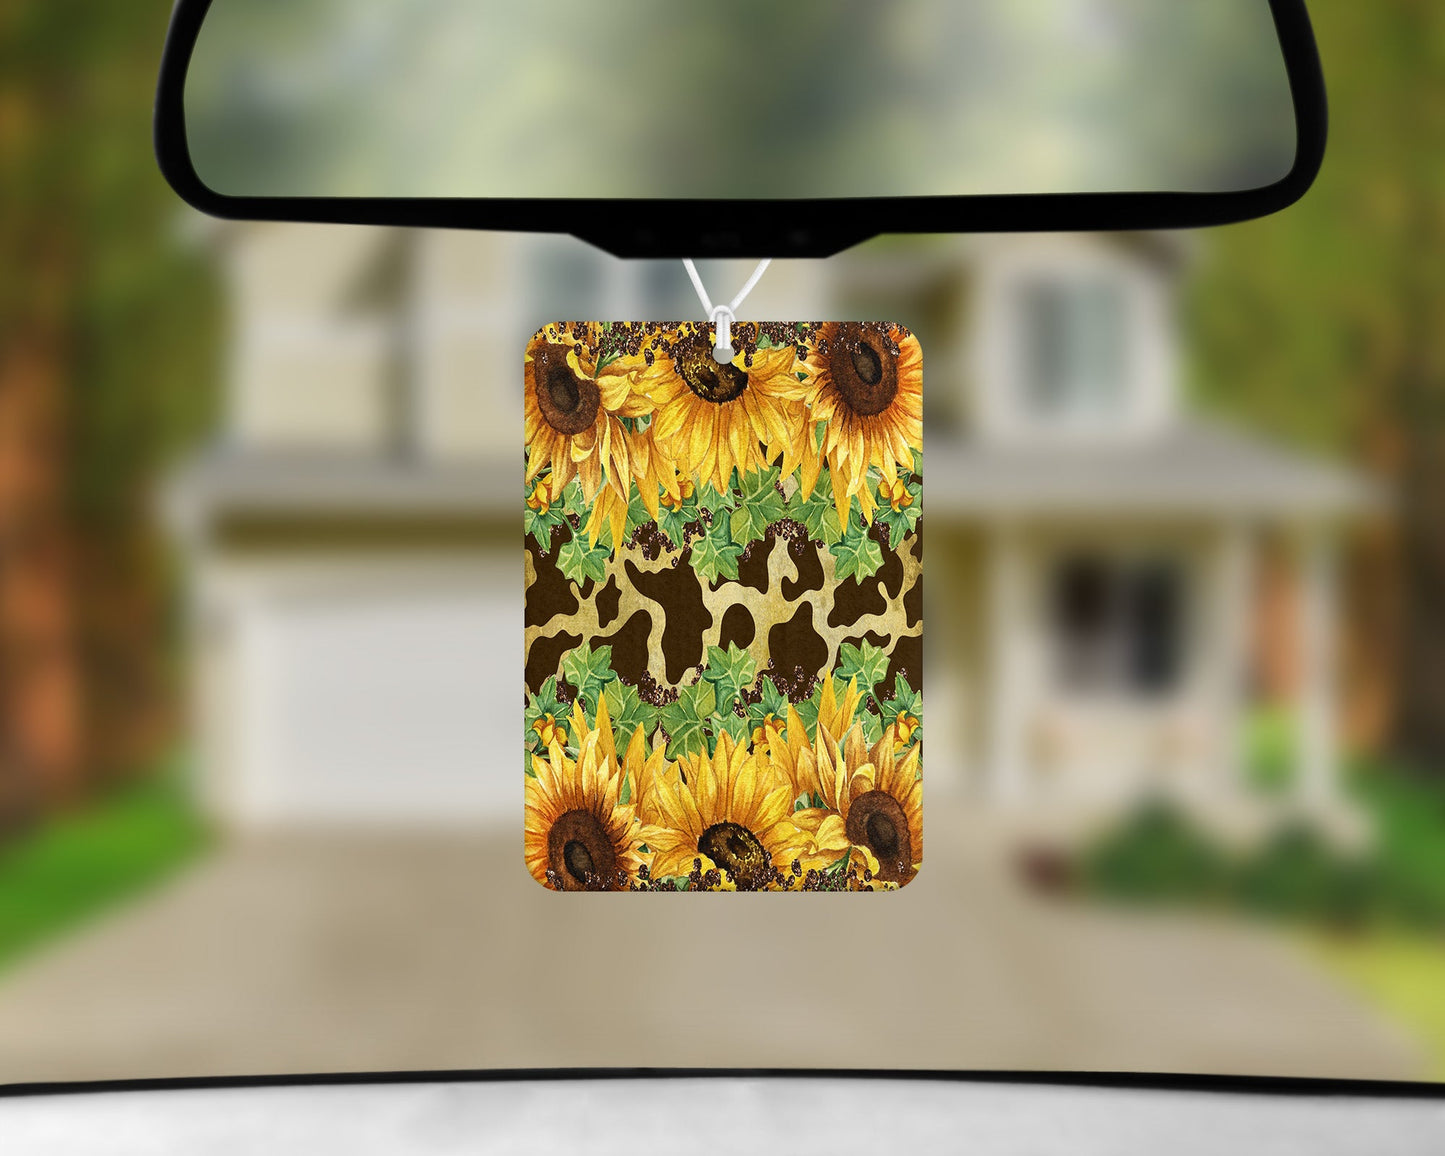 Cow Print Sunflowers|Freshie|Includes Scent Bottle - Vehicle Air Freshener